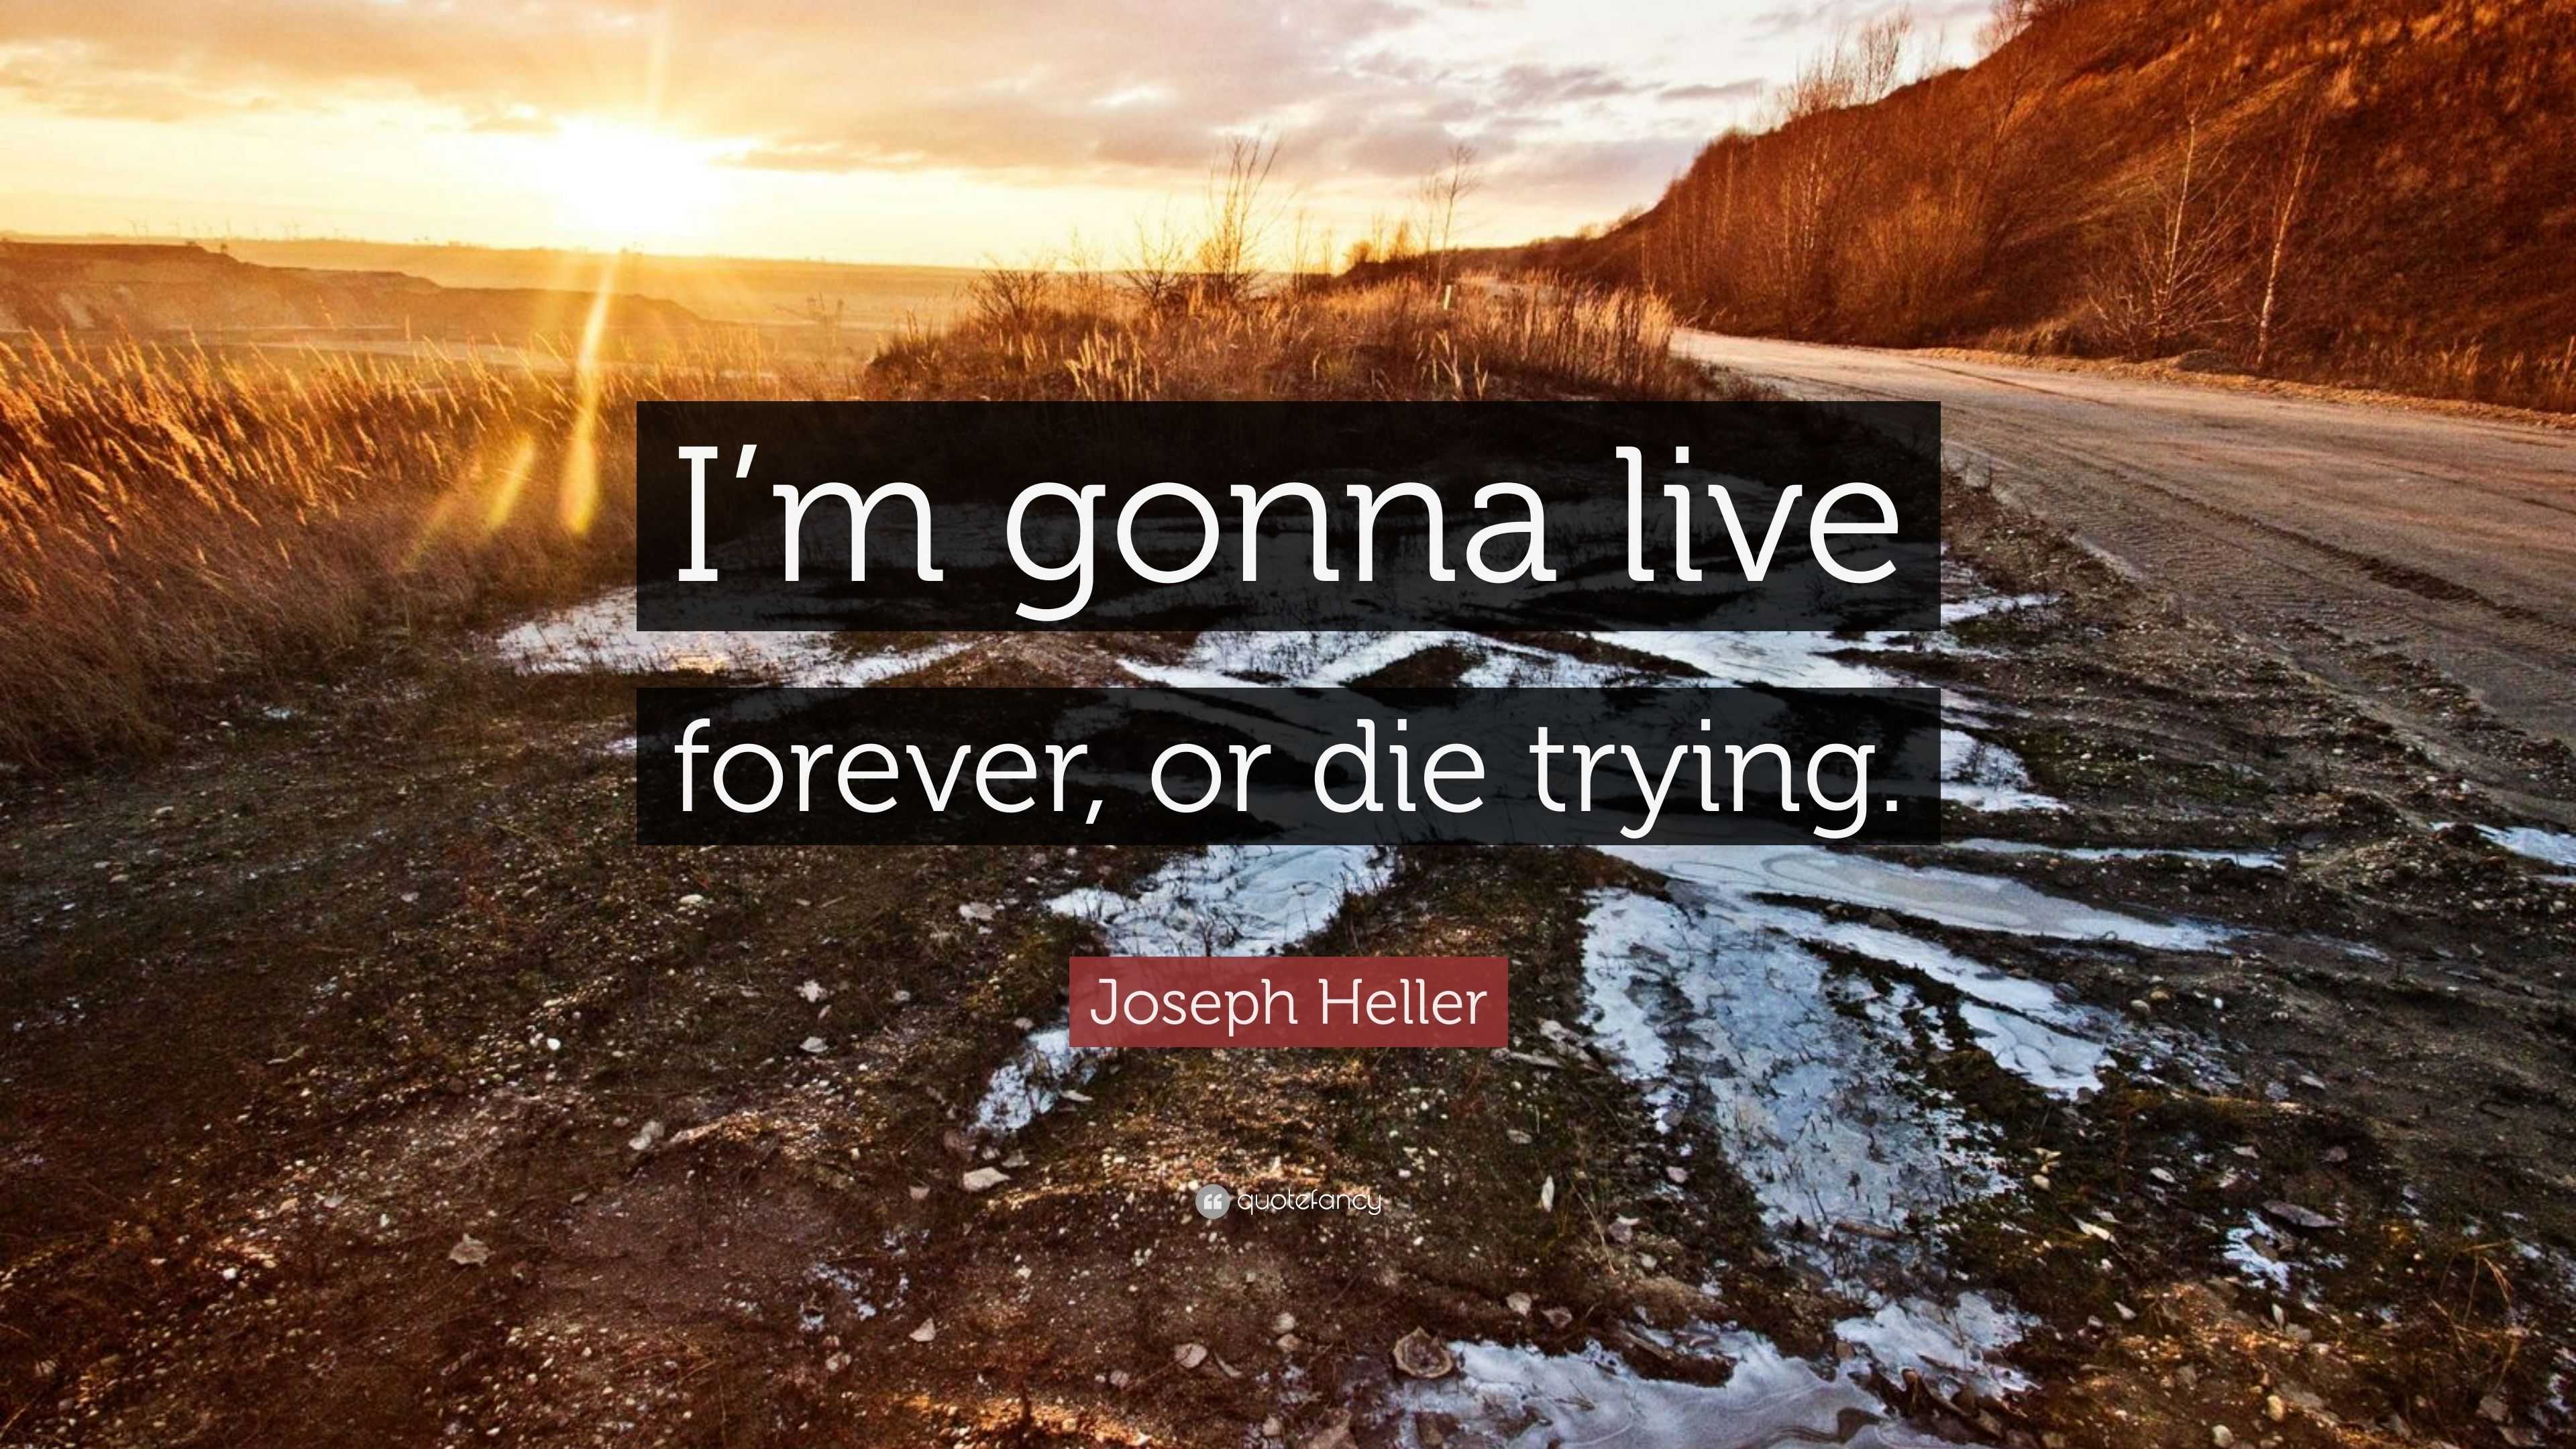 Joseph Heller Quote: "I'm gonna live forever, or die trying."